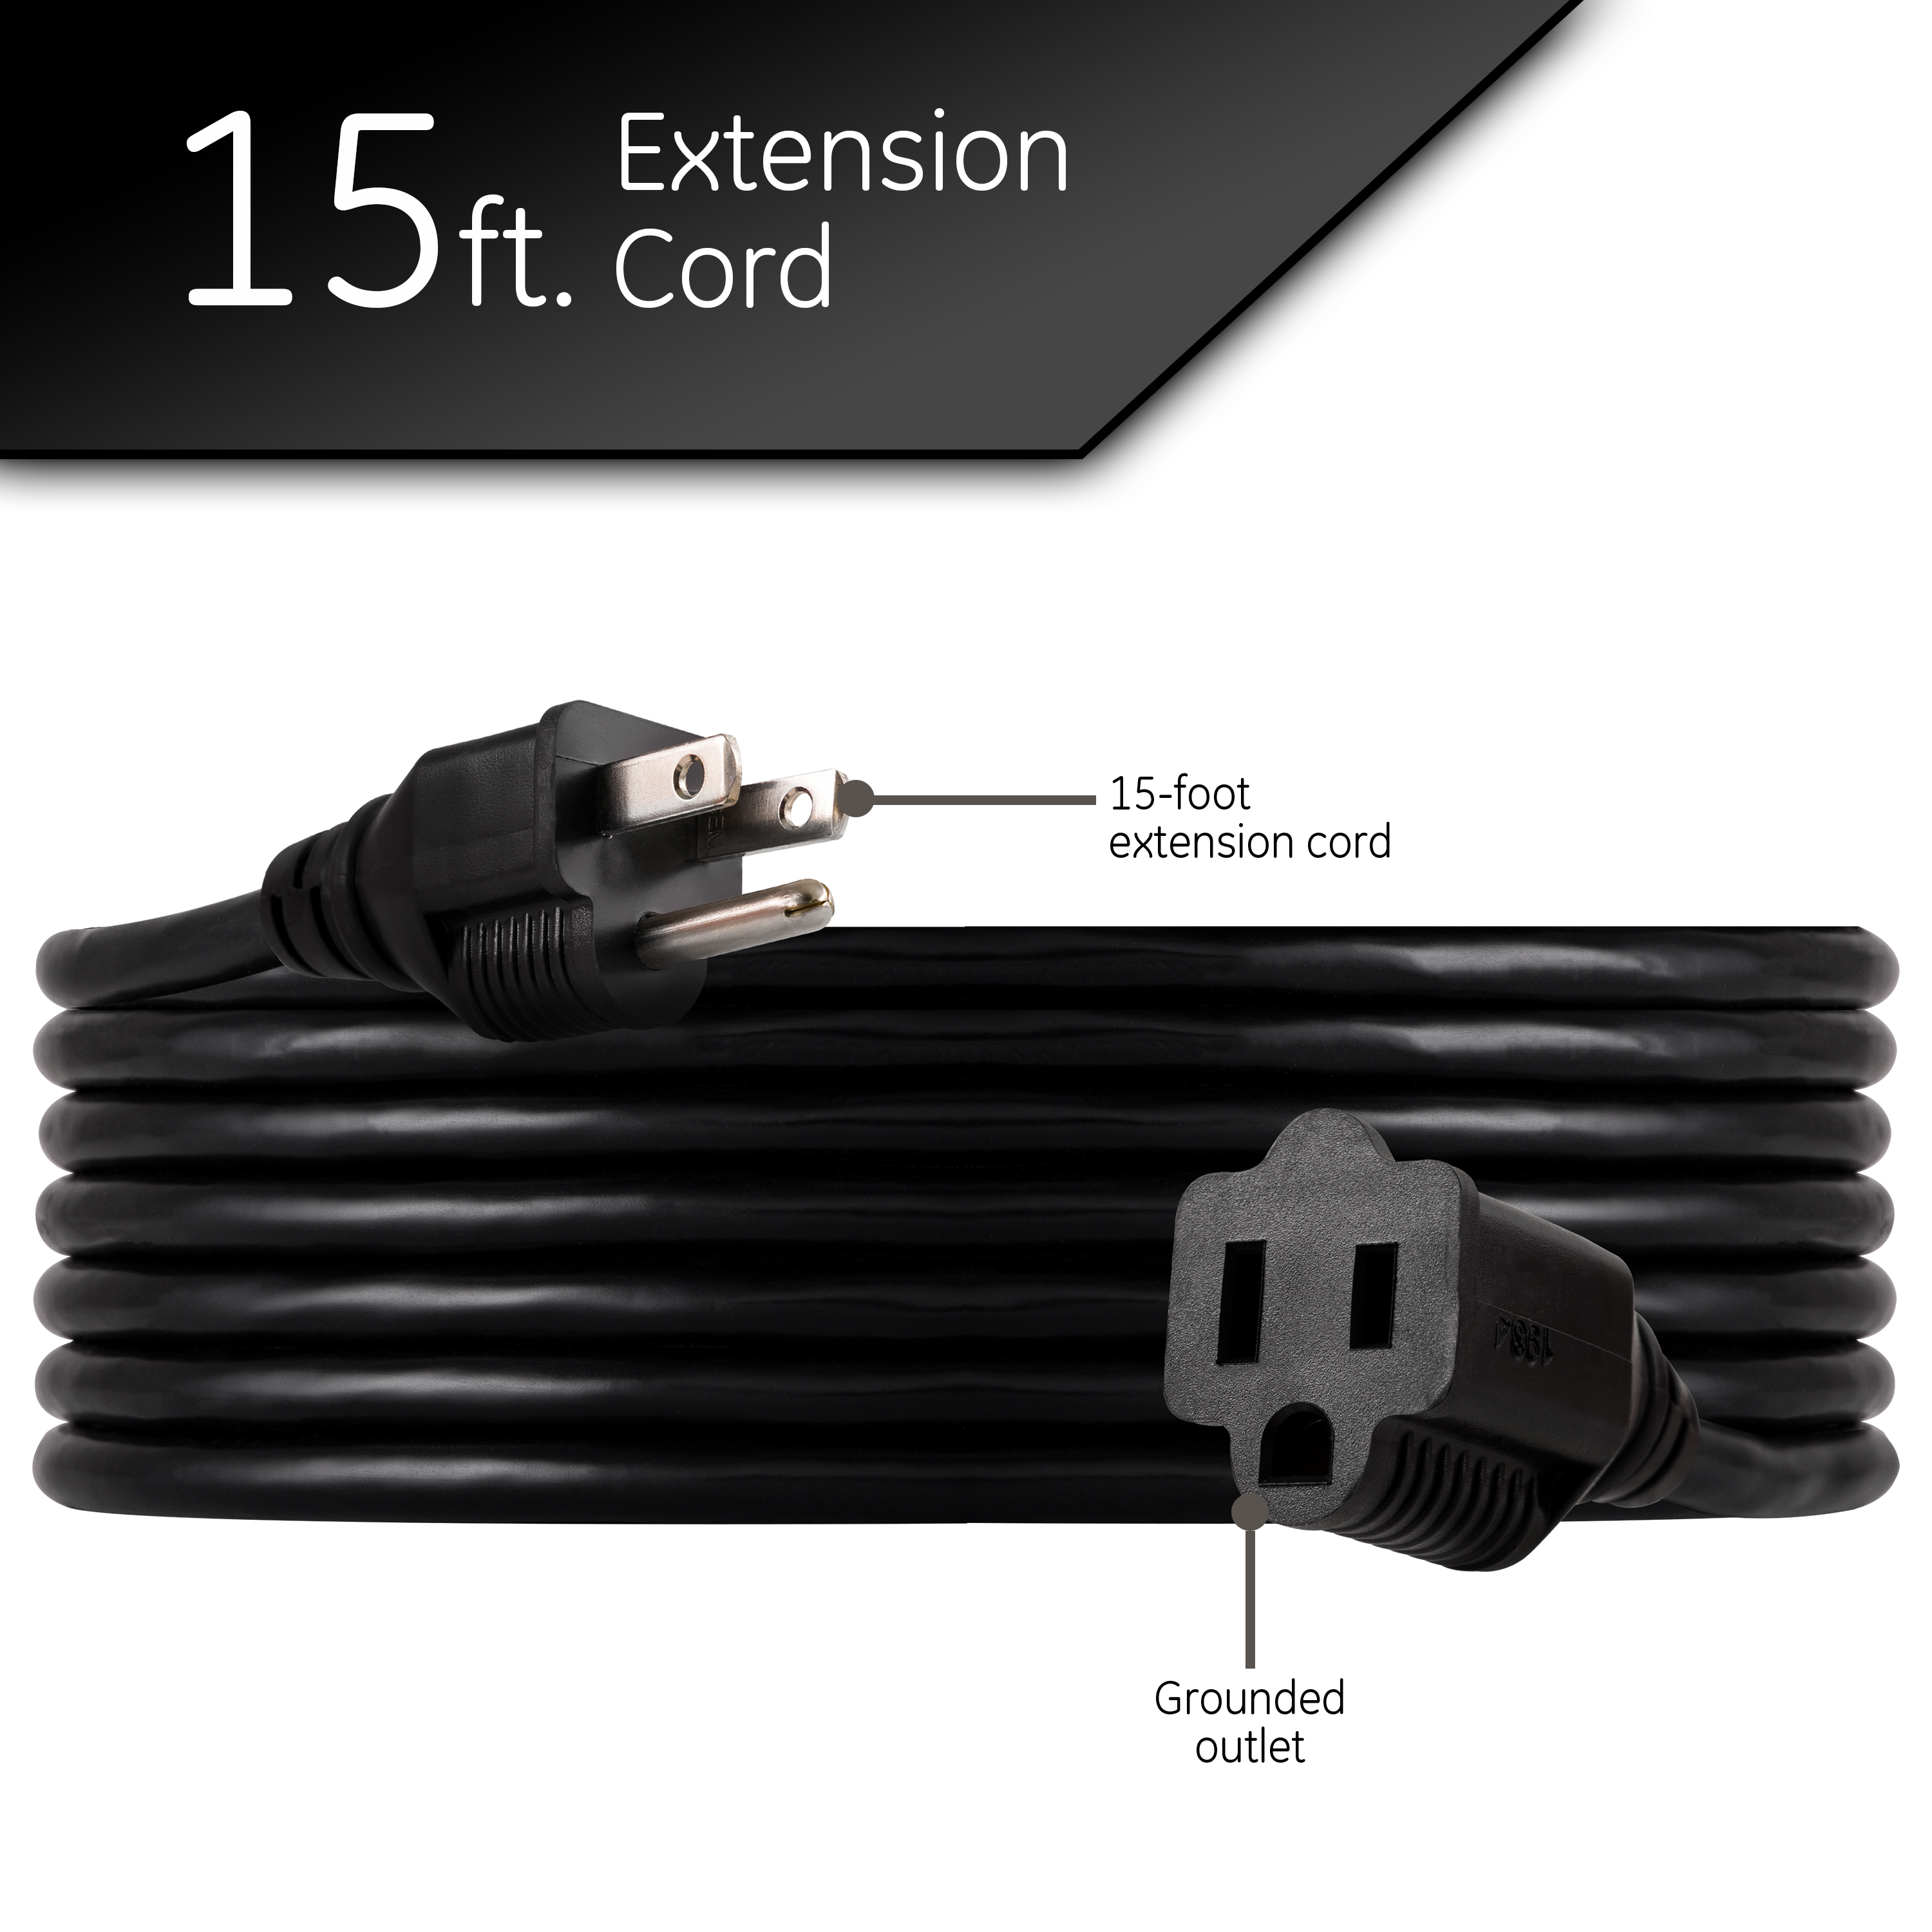 GE 15 ft Outdoor Extension Cord, 1 Outlet, Black, 36824 - image 3 of 7